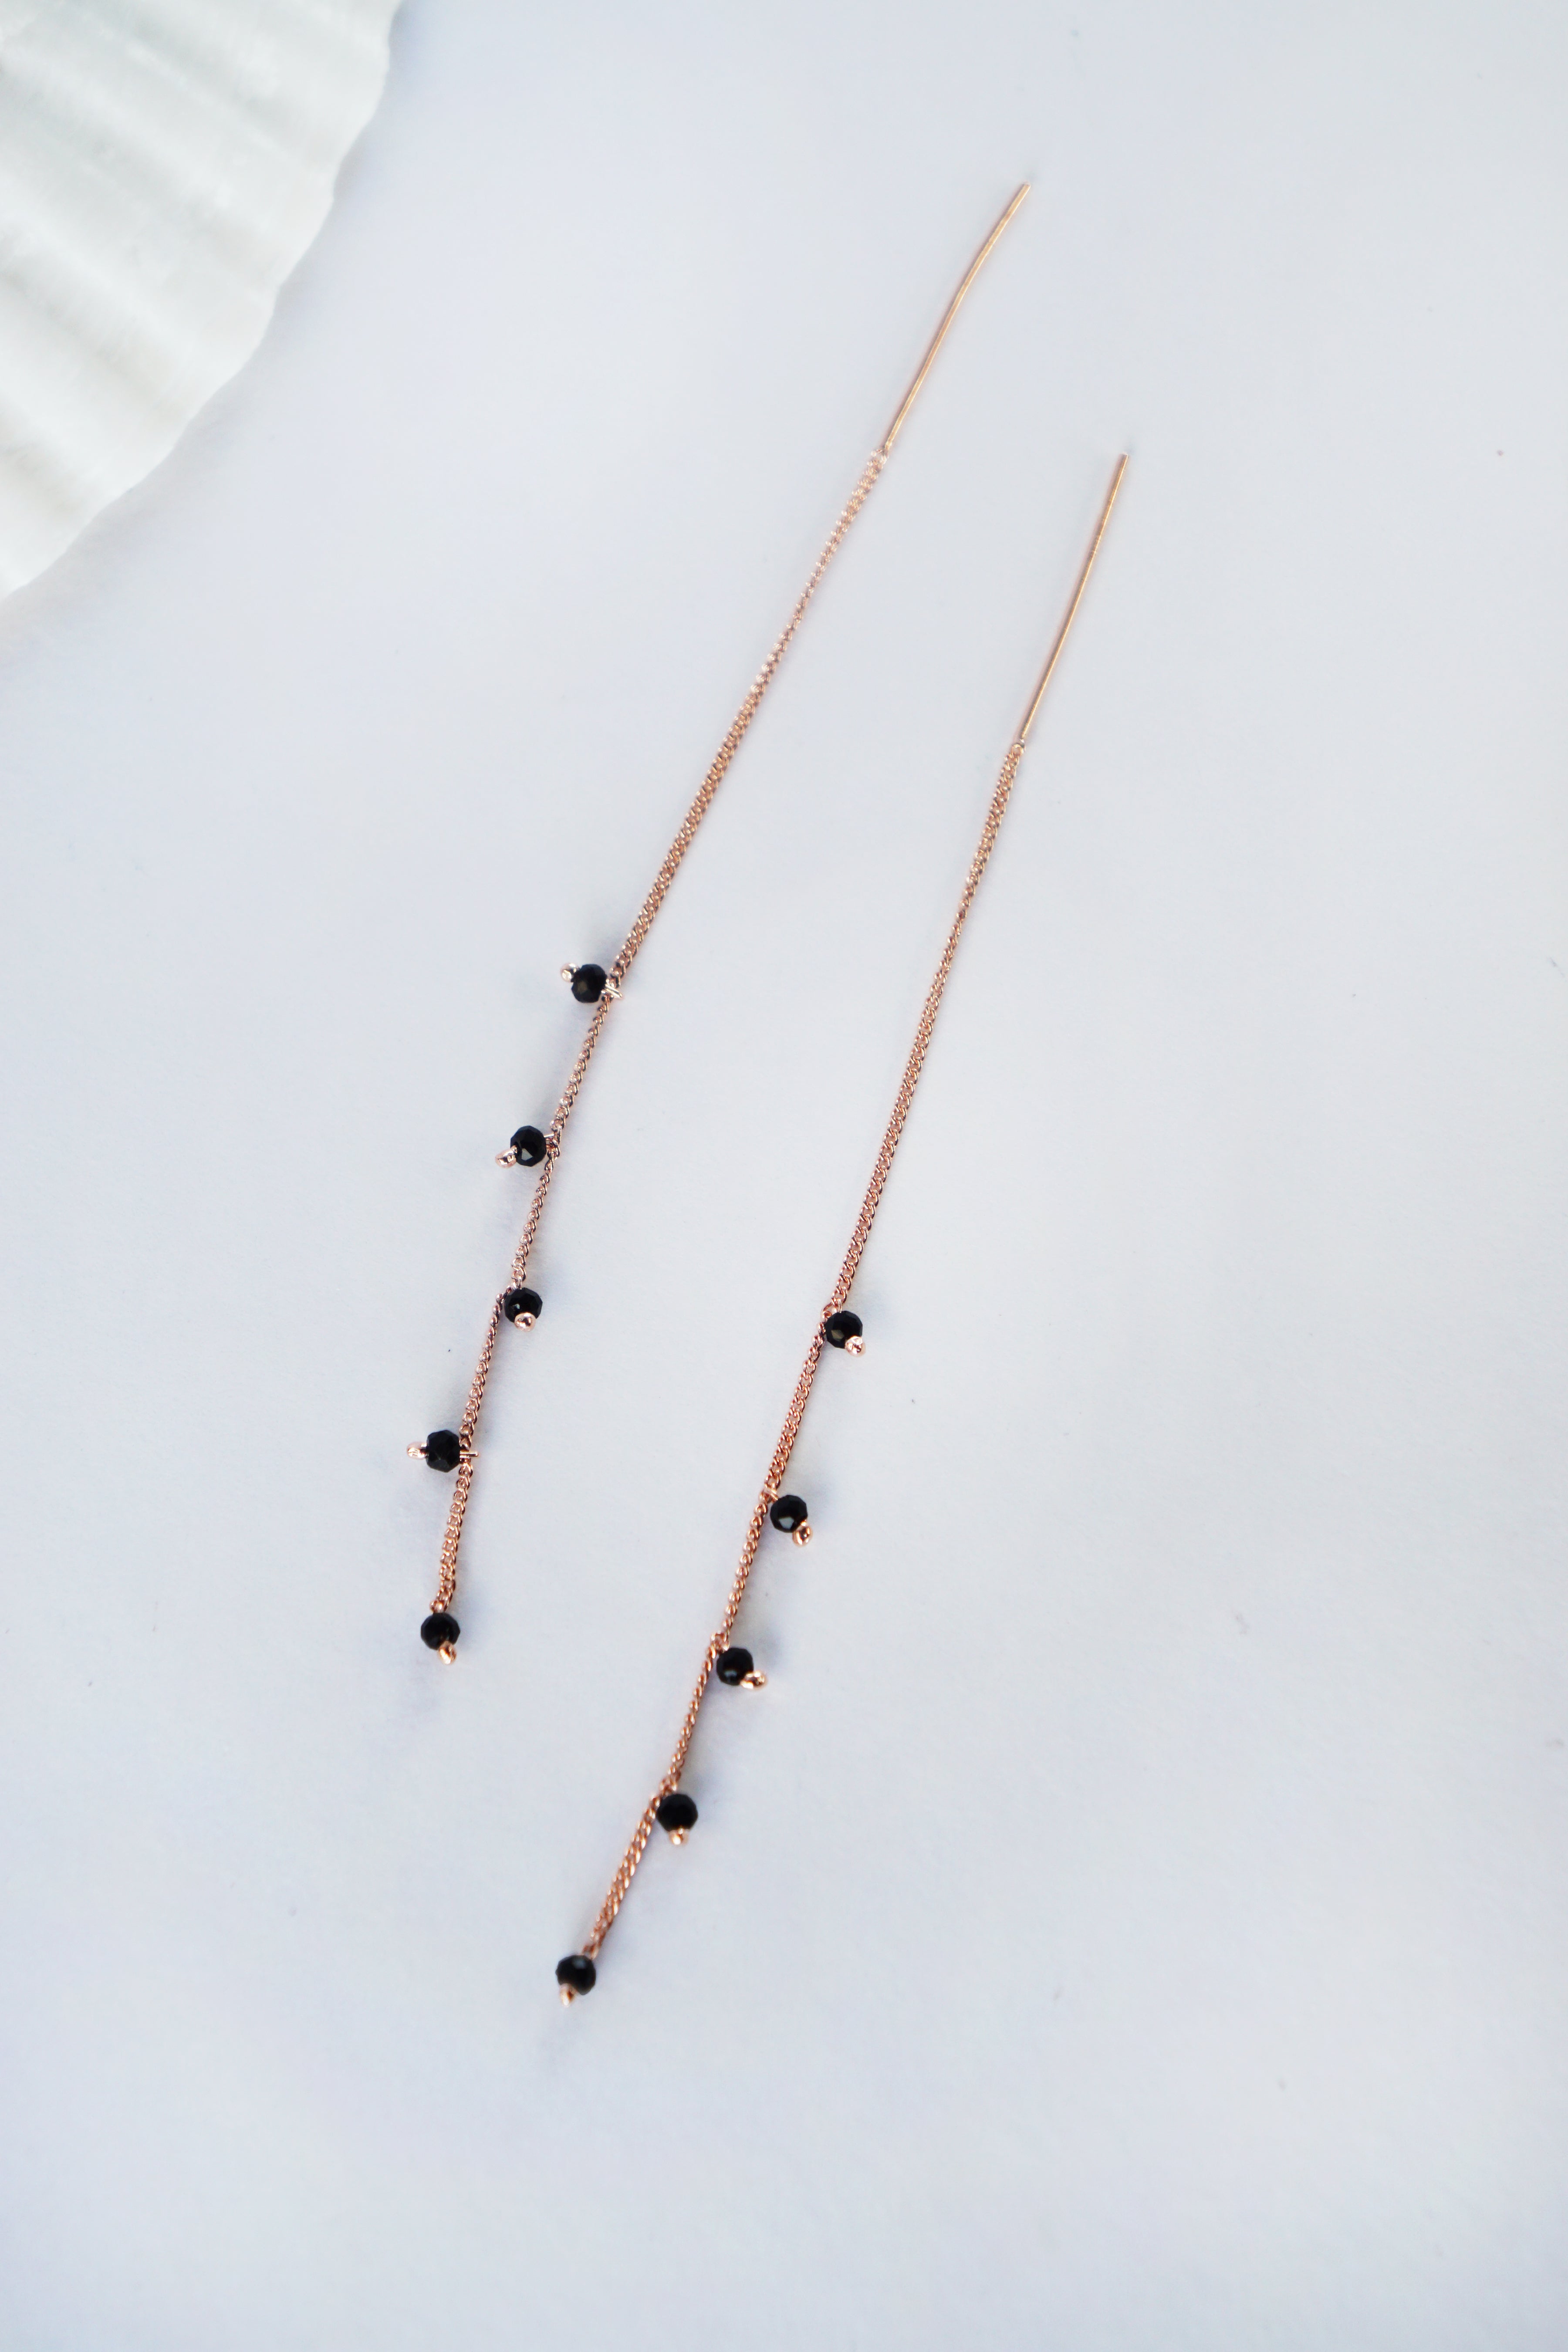 Wisteria Ear Threaders in Rose Gold - Black